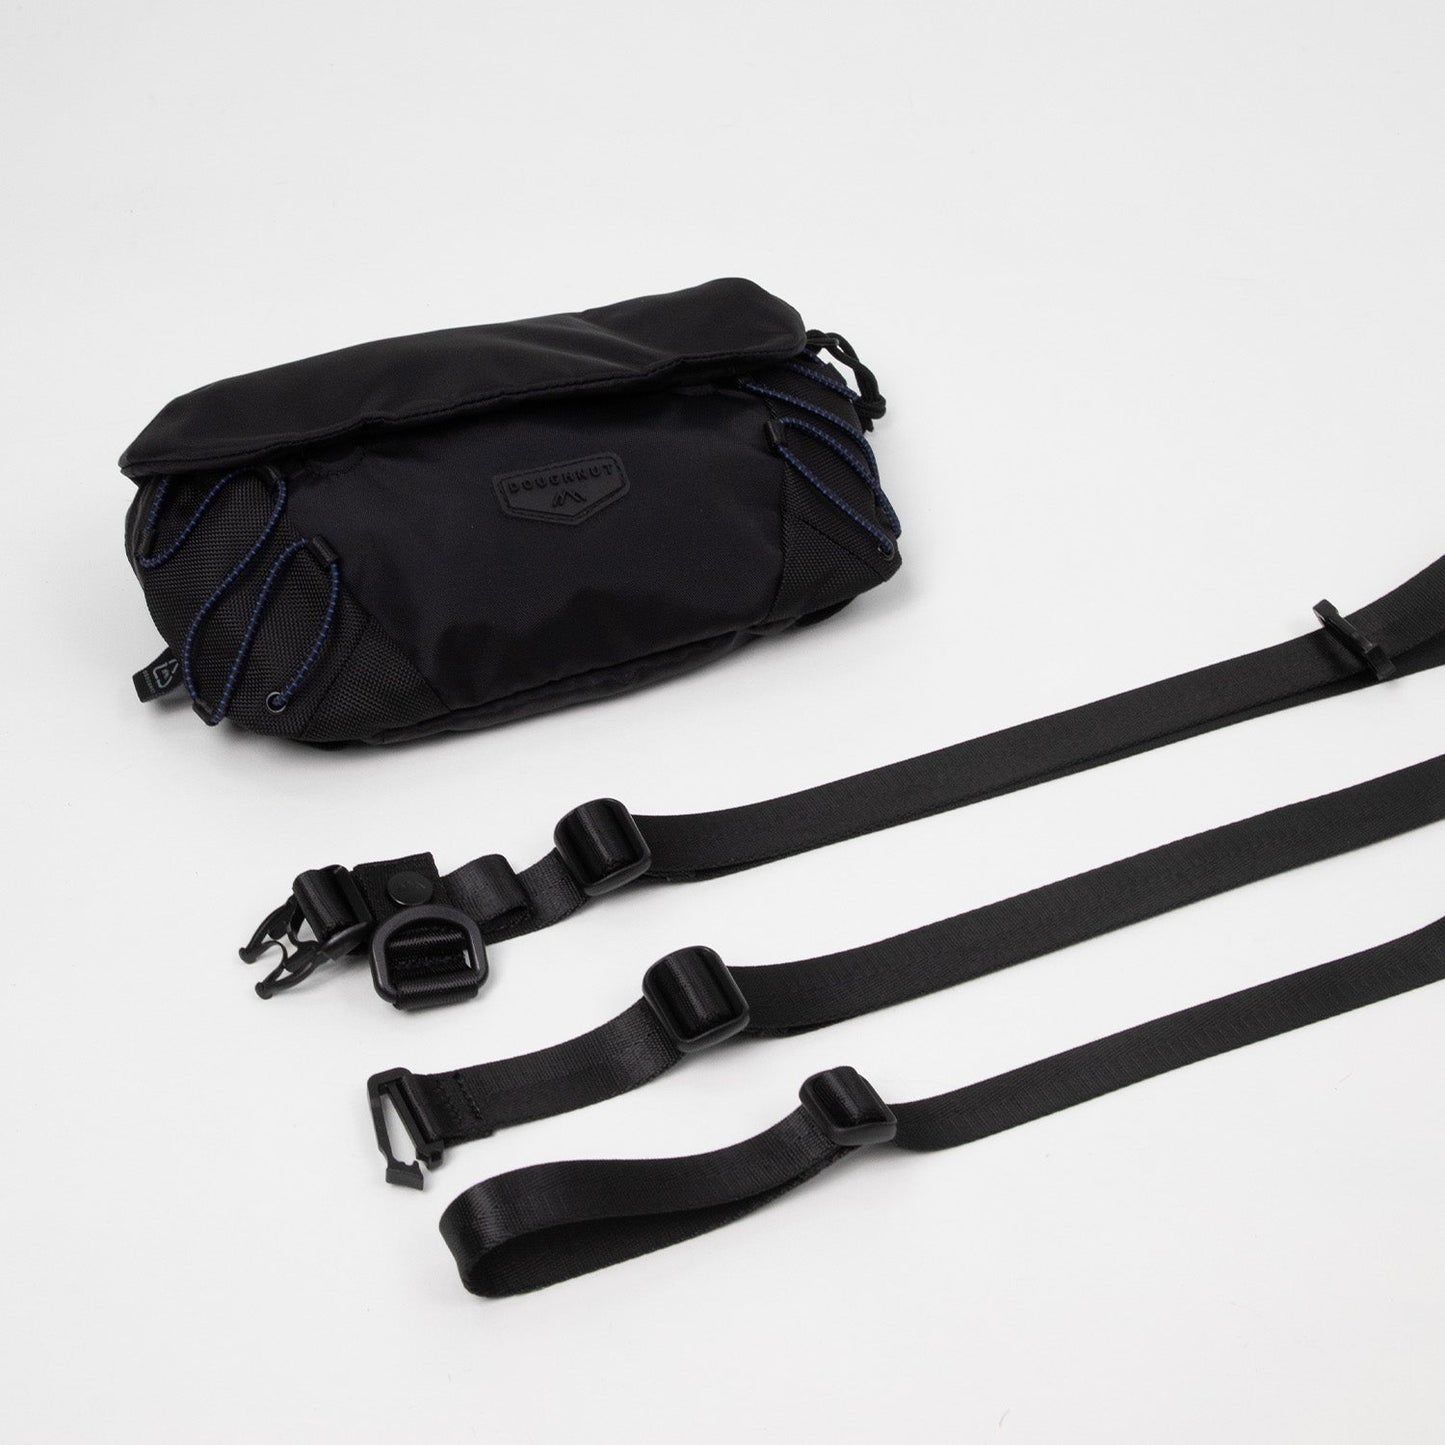 Atom The Actualise Series Harness Bag